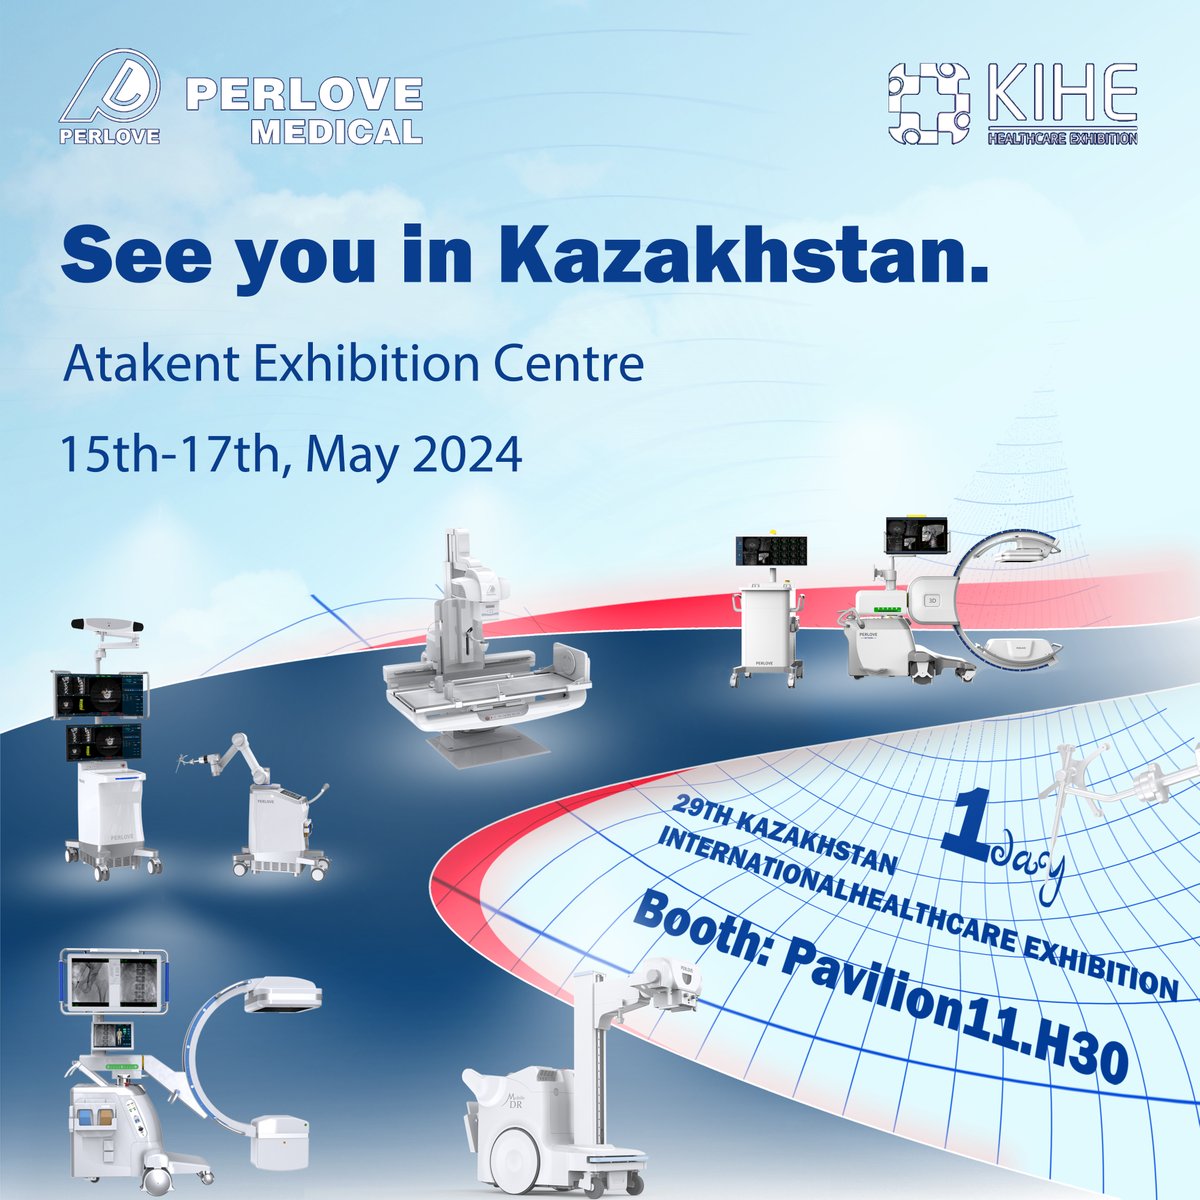 🎊 Such an exciting moment! 
Only 1 day left until the 29th Kazakhstan International Healthcare Exhibition, #KIHE2024! 🎈 
#PerloveMedical
#KazakhstanExhibition
#KIHEExhibition
#2024Exhibition
#Atakent
#MedicalInnovation
#MedicalImage